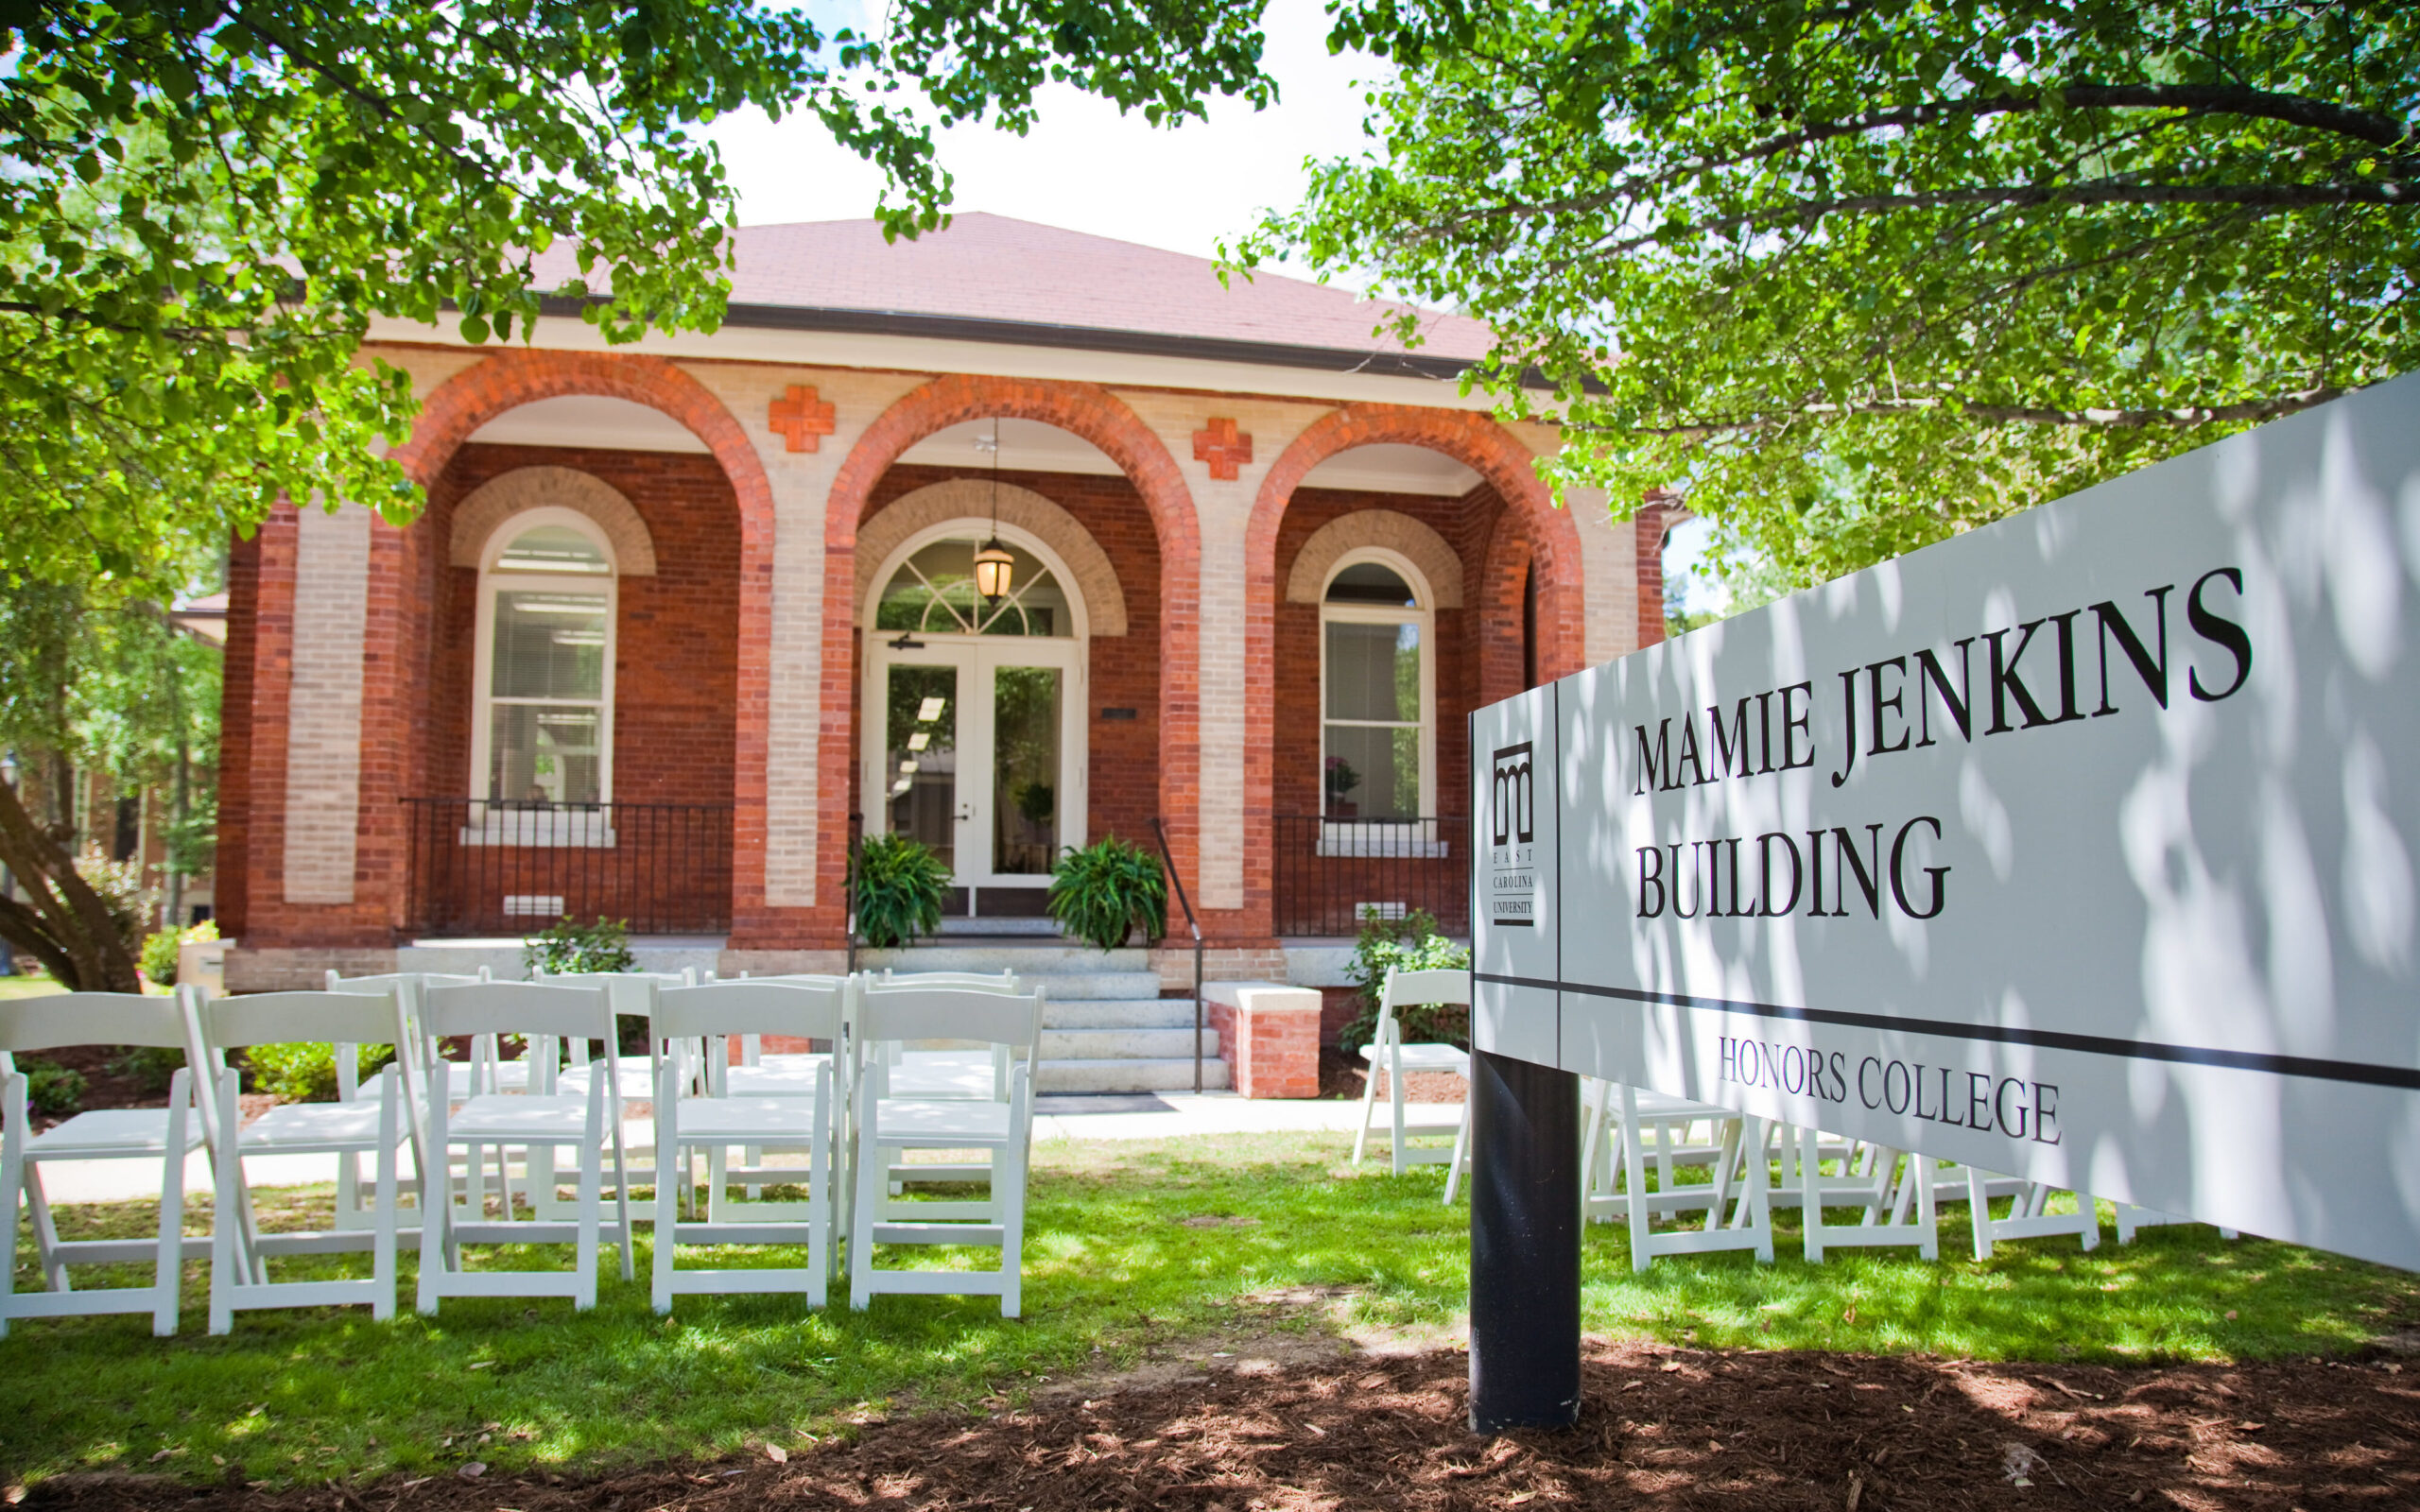 Mamie Jenkins Building, a historic brick building at ECU. The historic building has brick arches surrounding the porch of the building. 